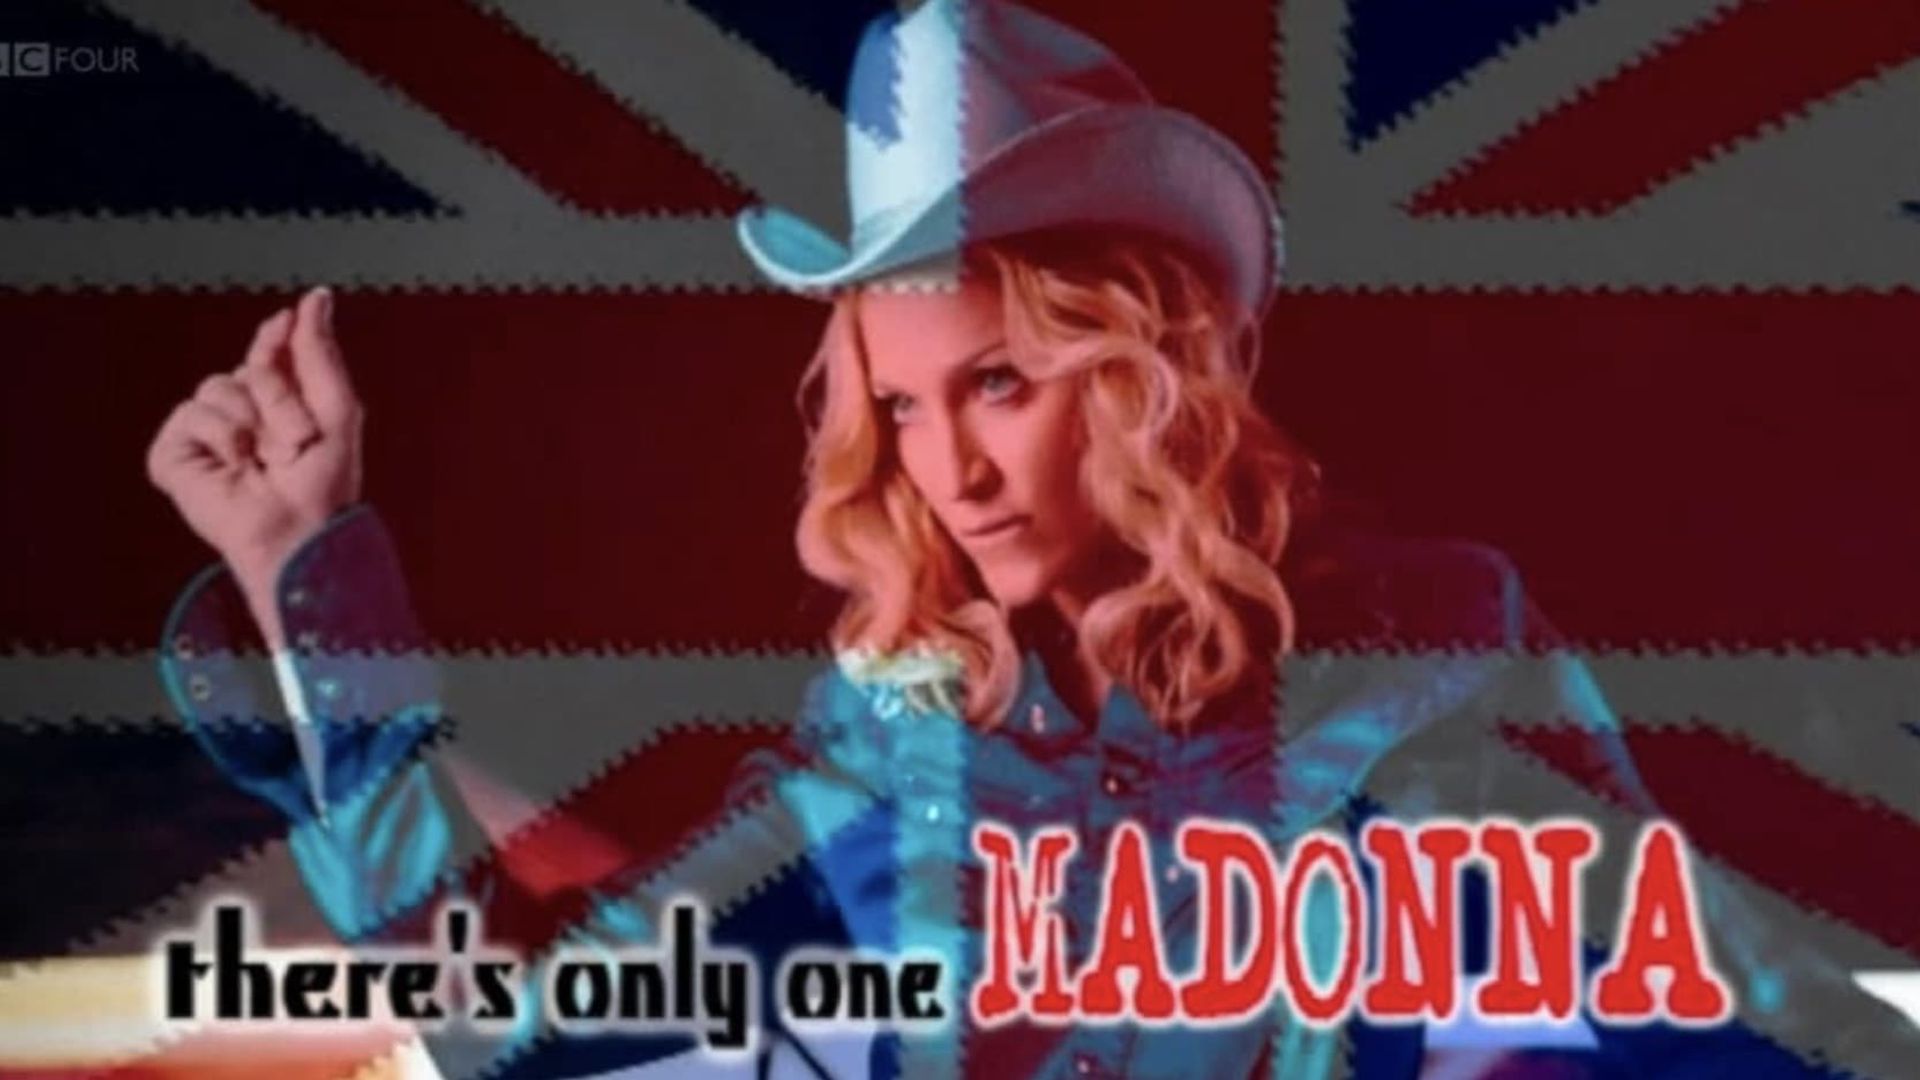 There's Only One Madonna background